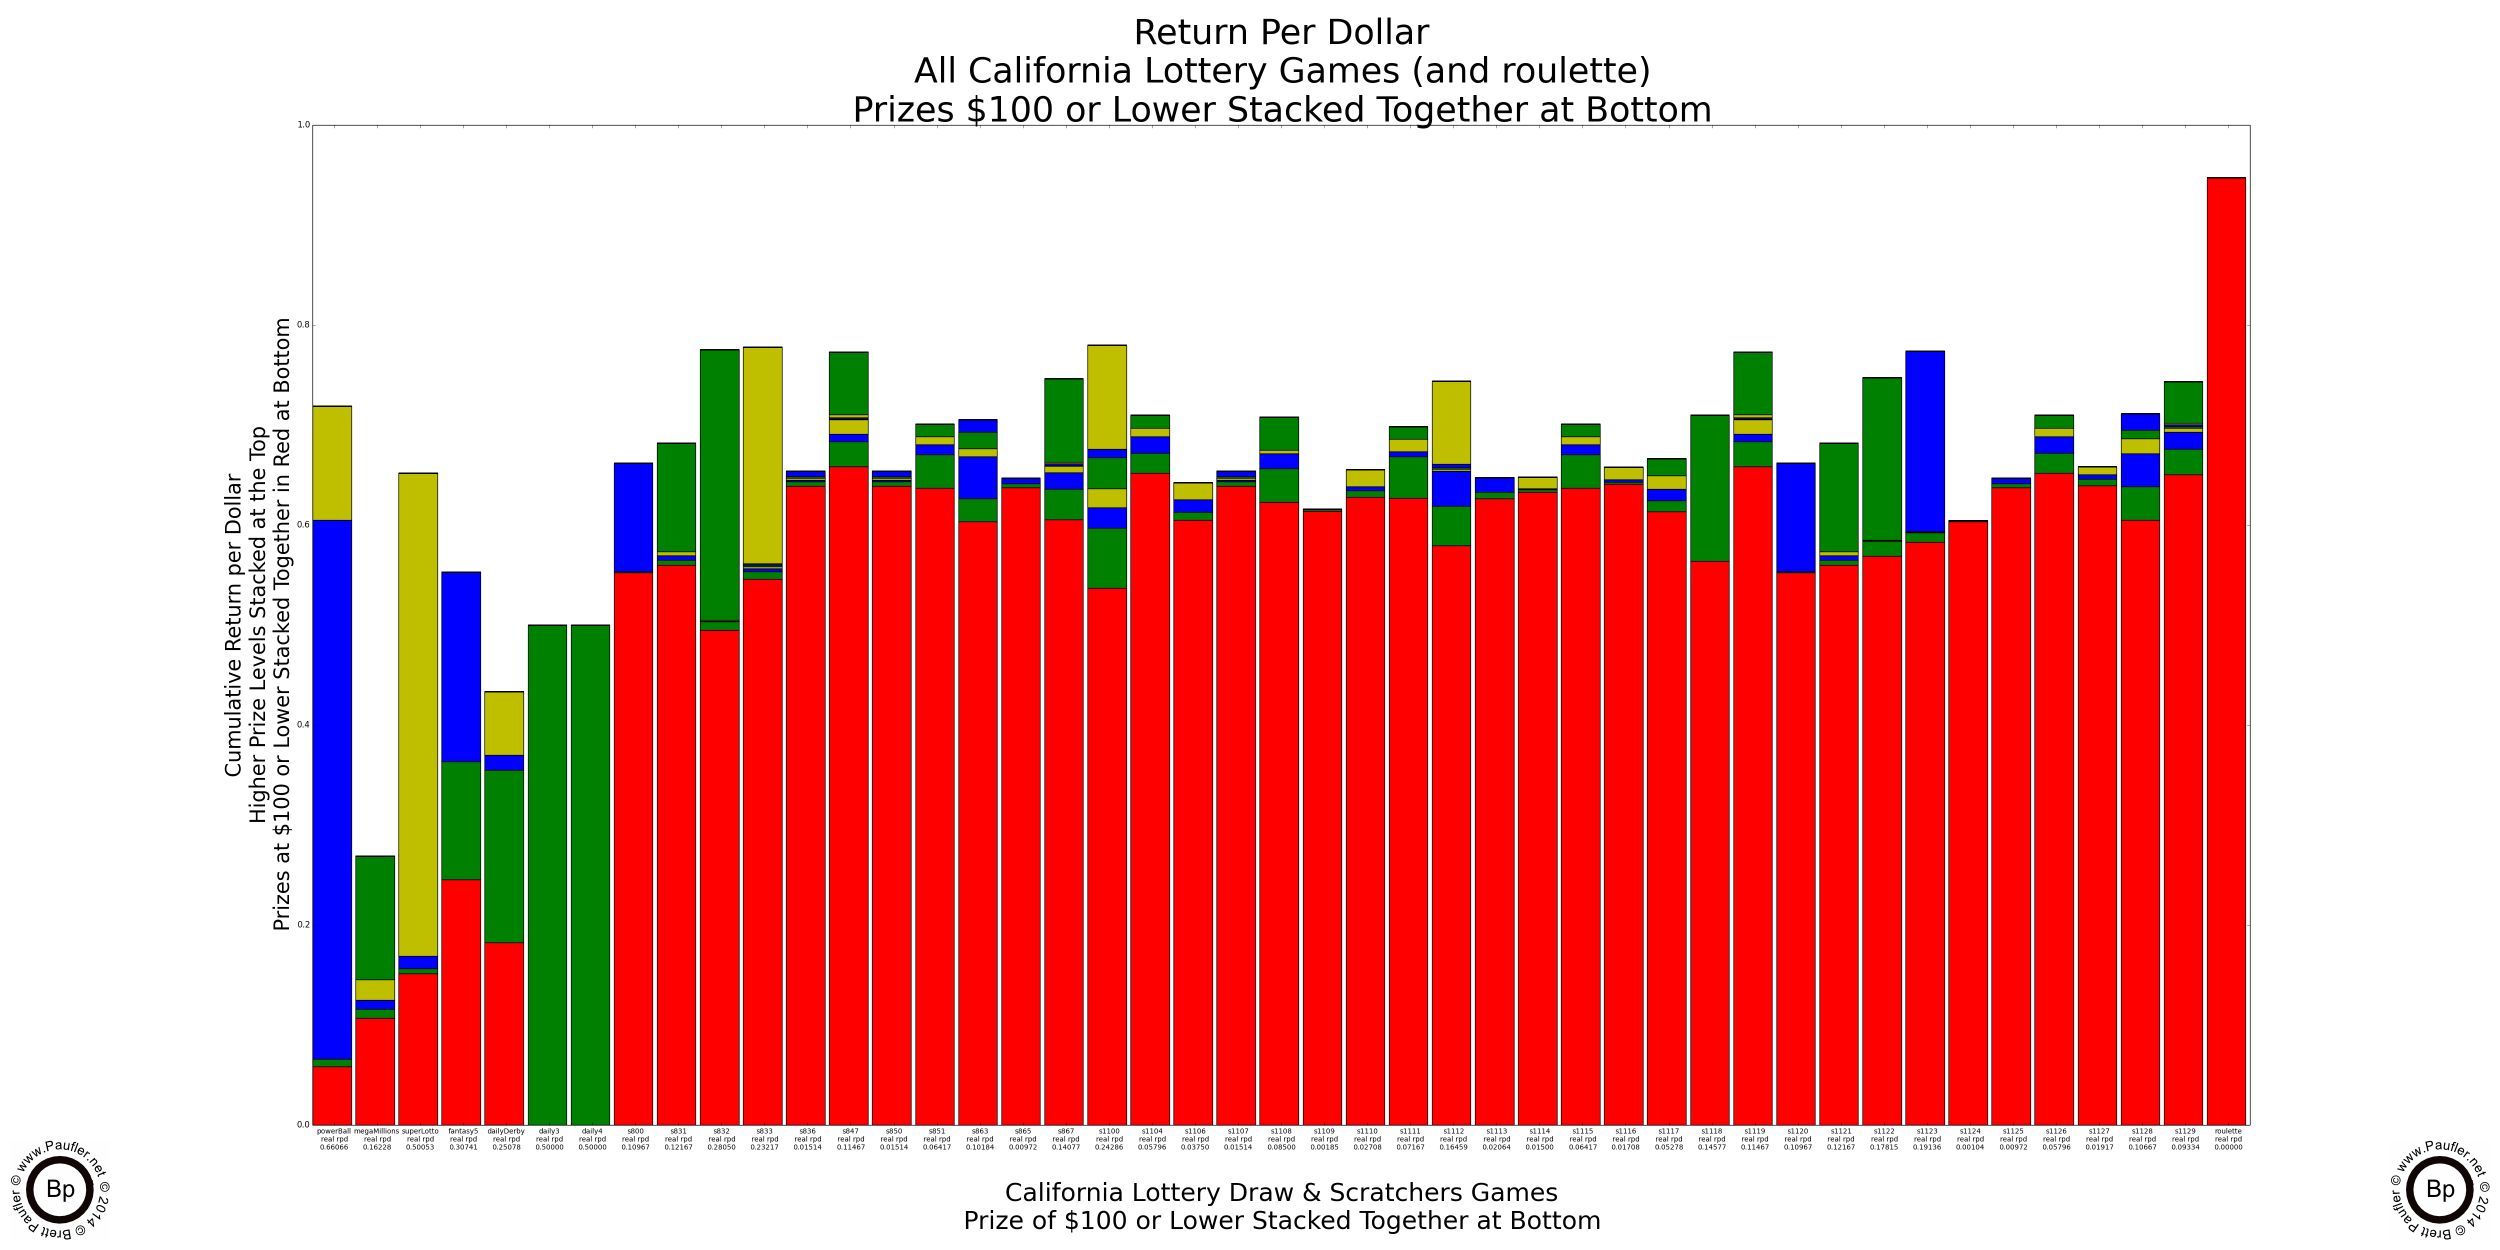 California Lottery Games Return Per Dollar Graph with return for prizes below $100 lumped together